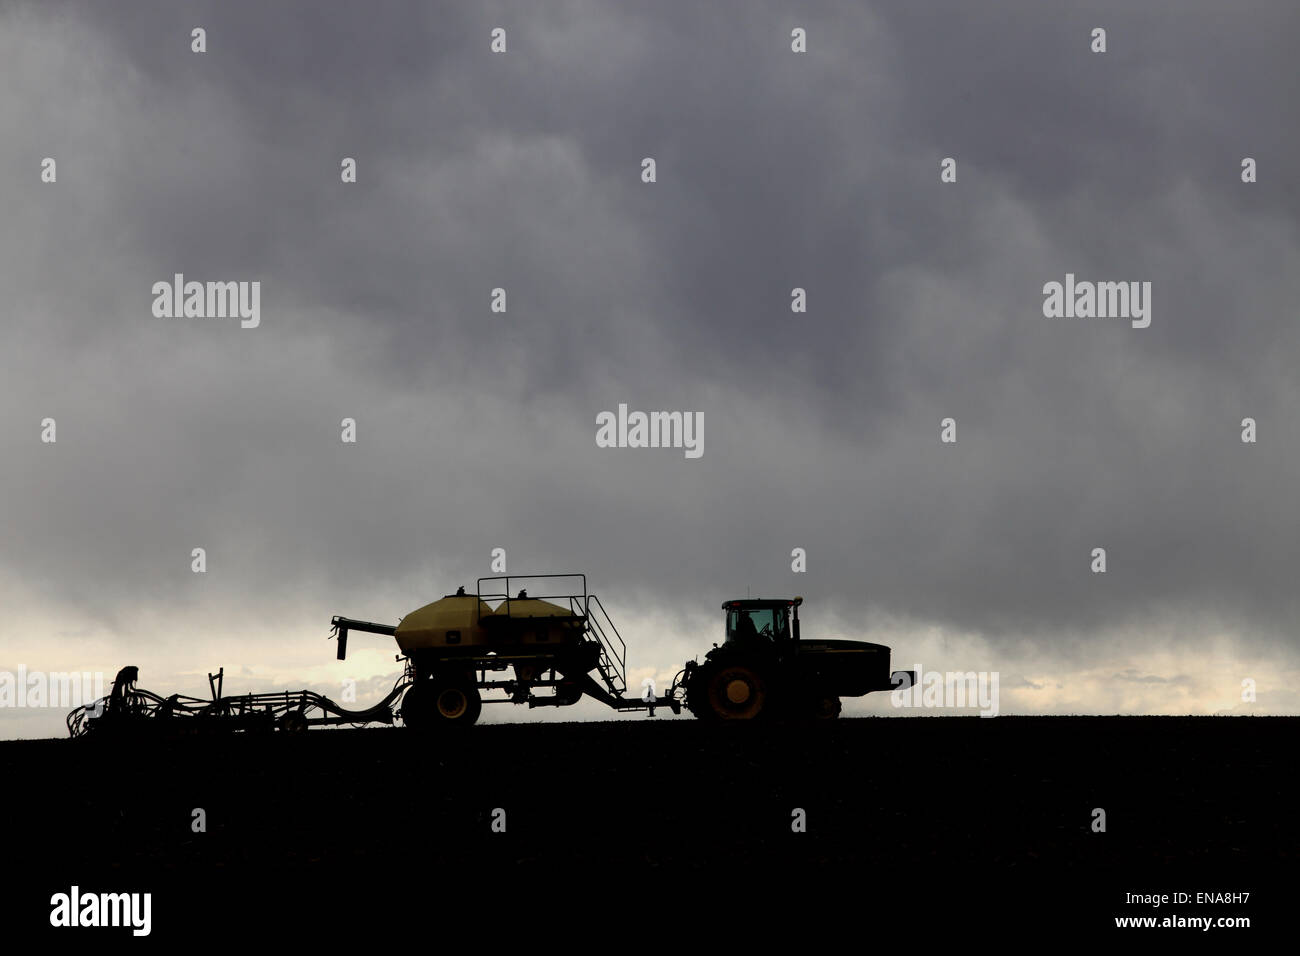 A tractor pulling agricultural implements, planting wheat in the fertile farm fields of Idaho.. Stock Photo